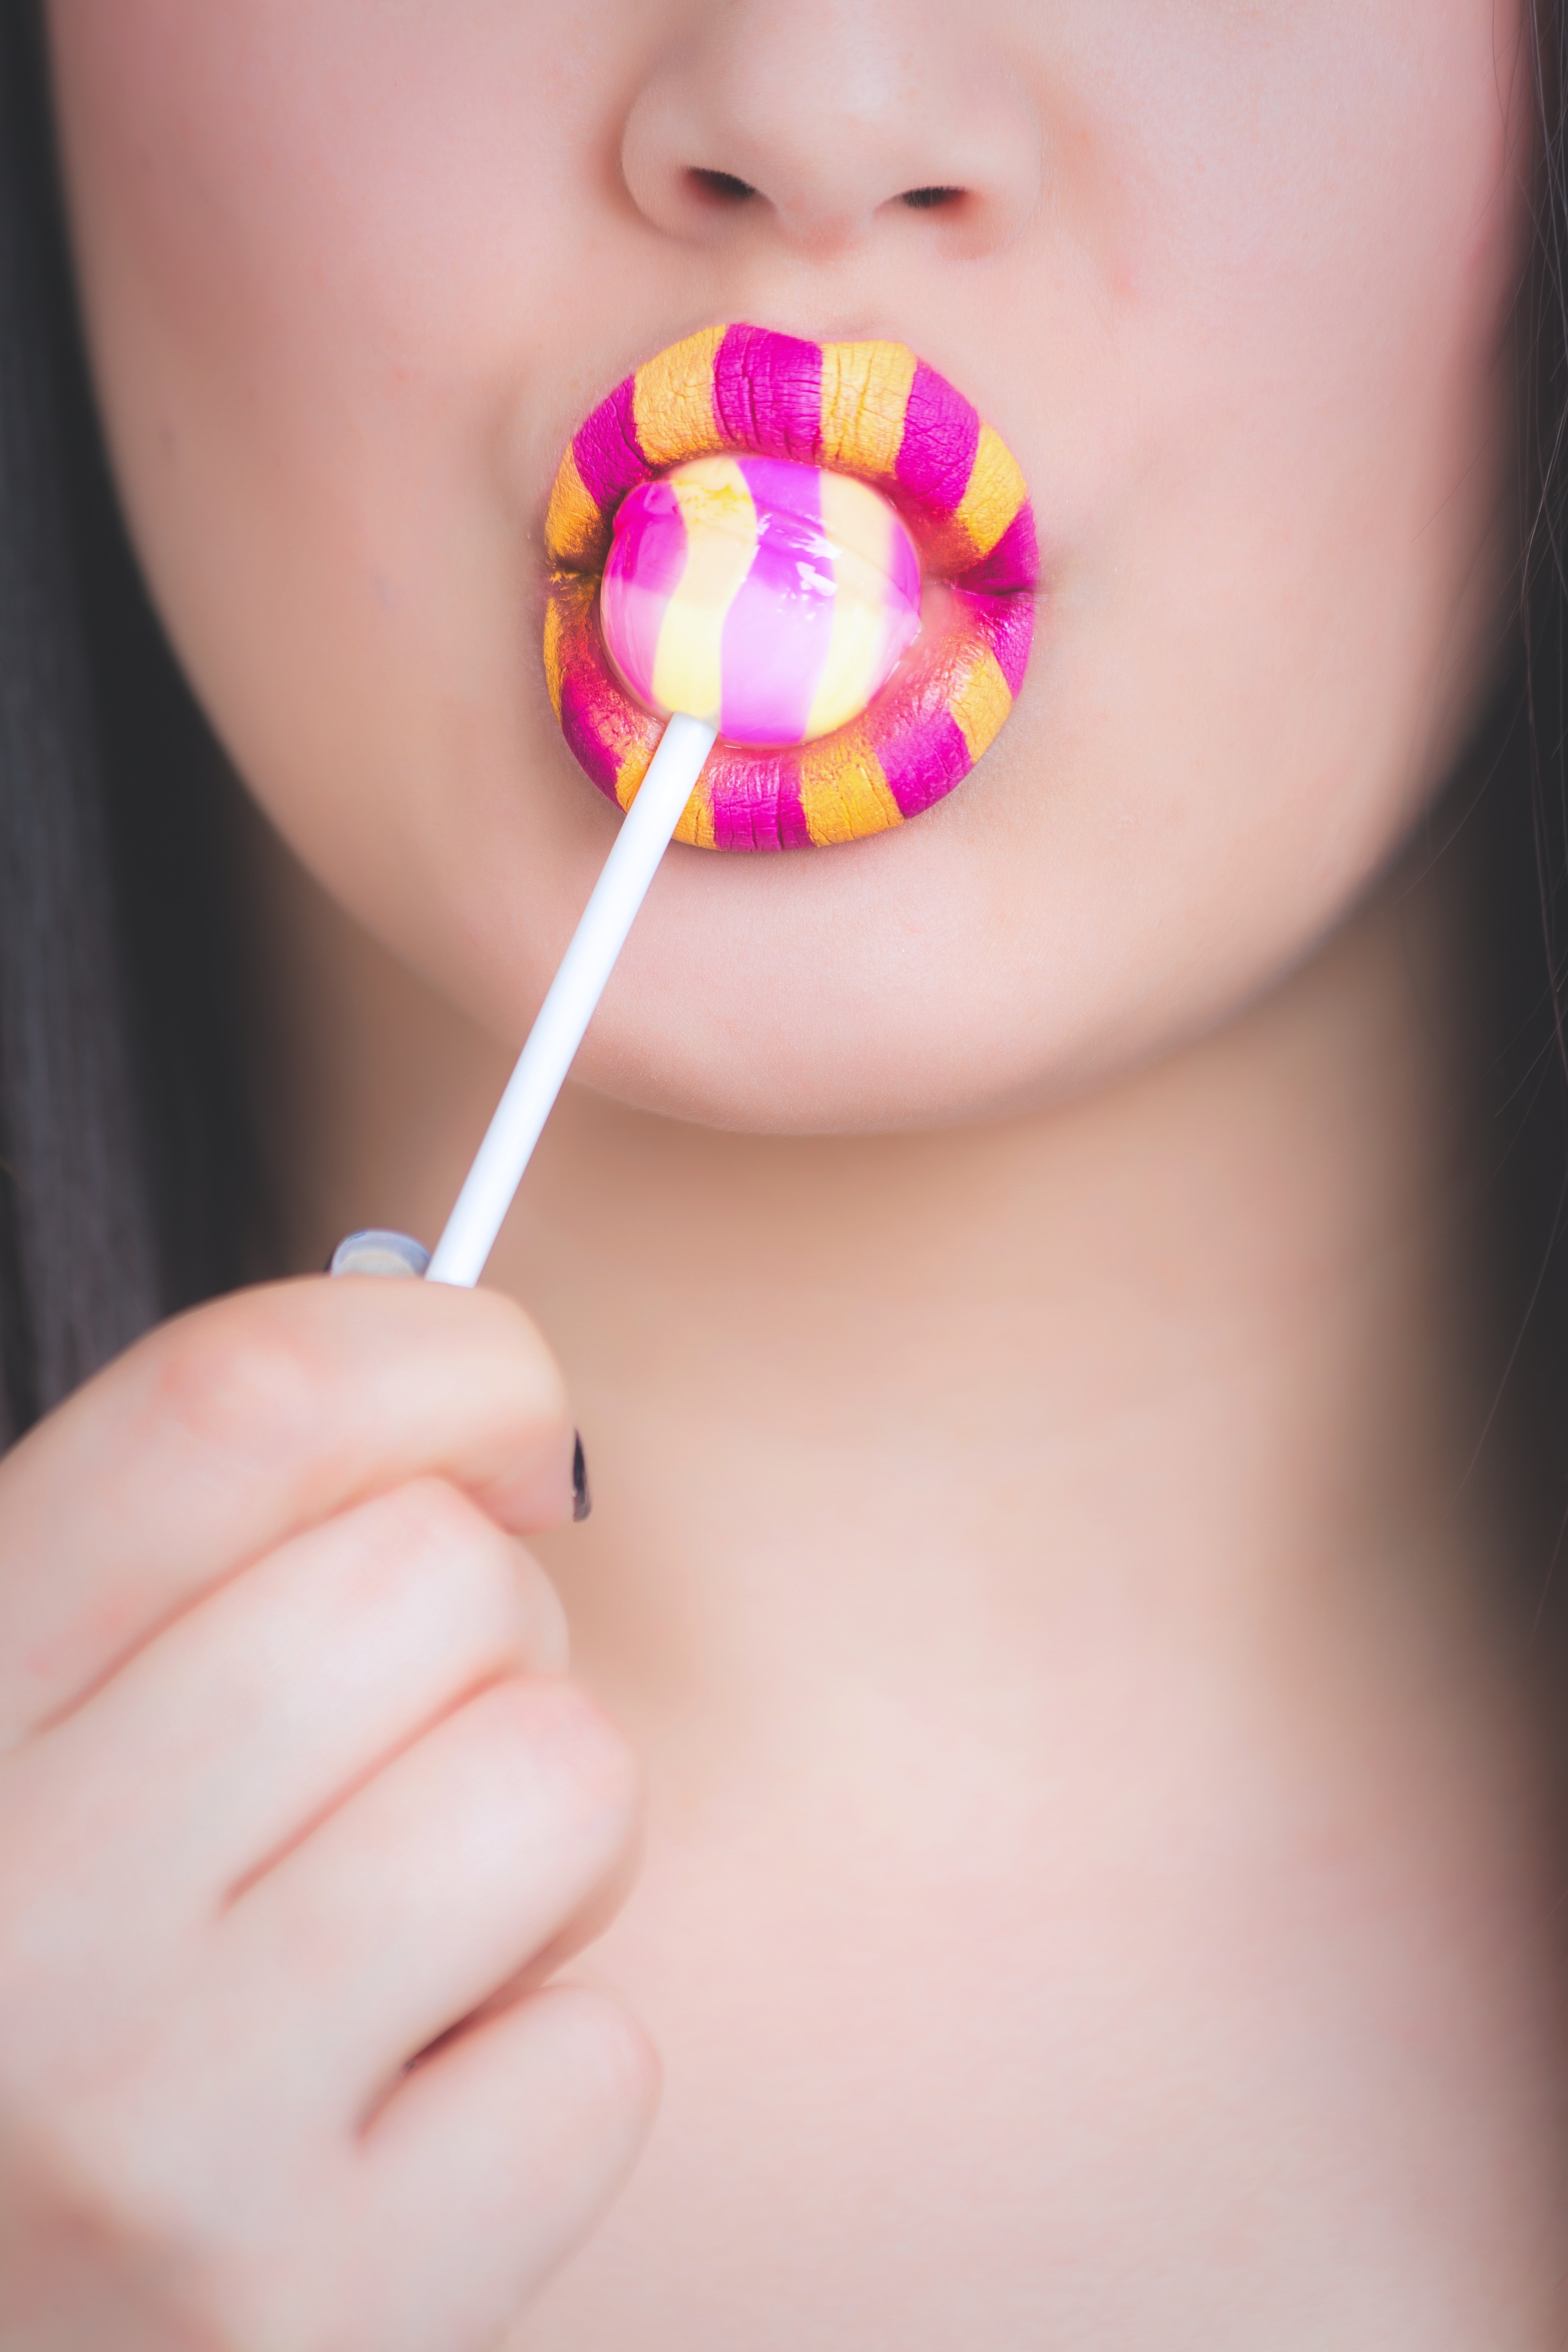 Woman With Yellow and Pink Lipstick Eating LolliPop, Nose, Young, Woman, Sweet, HQ Photo